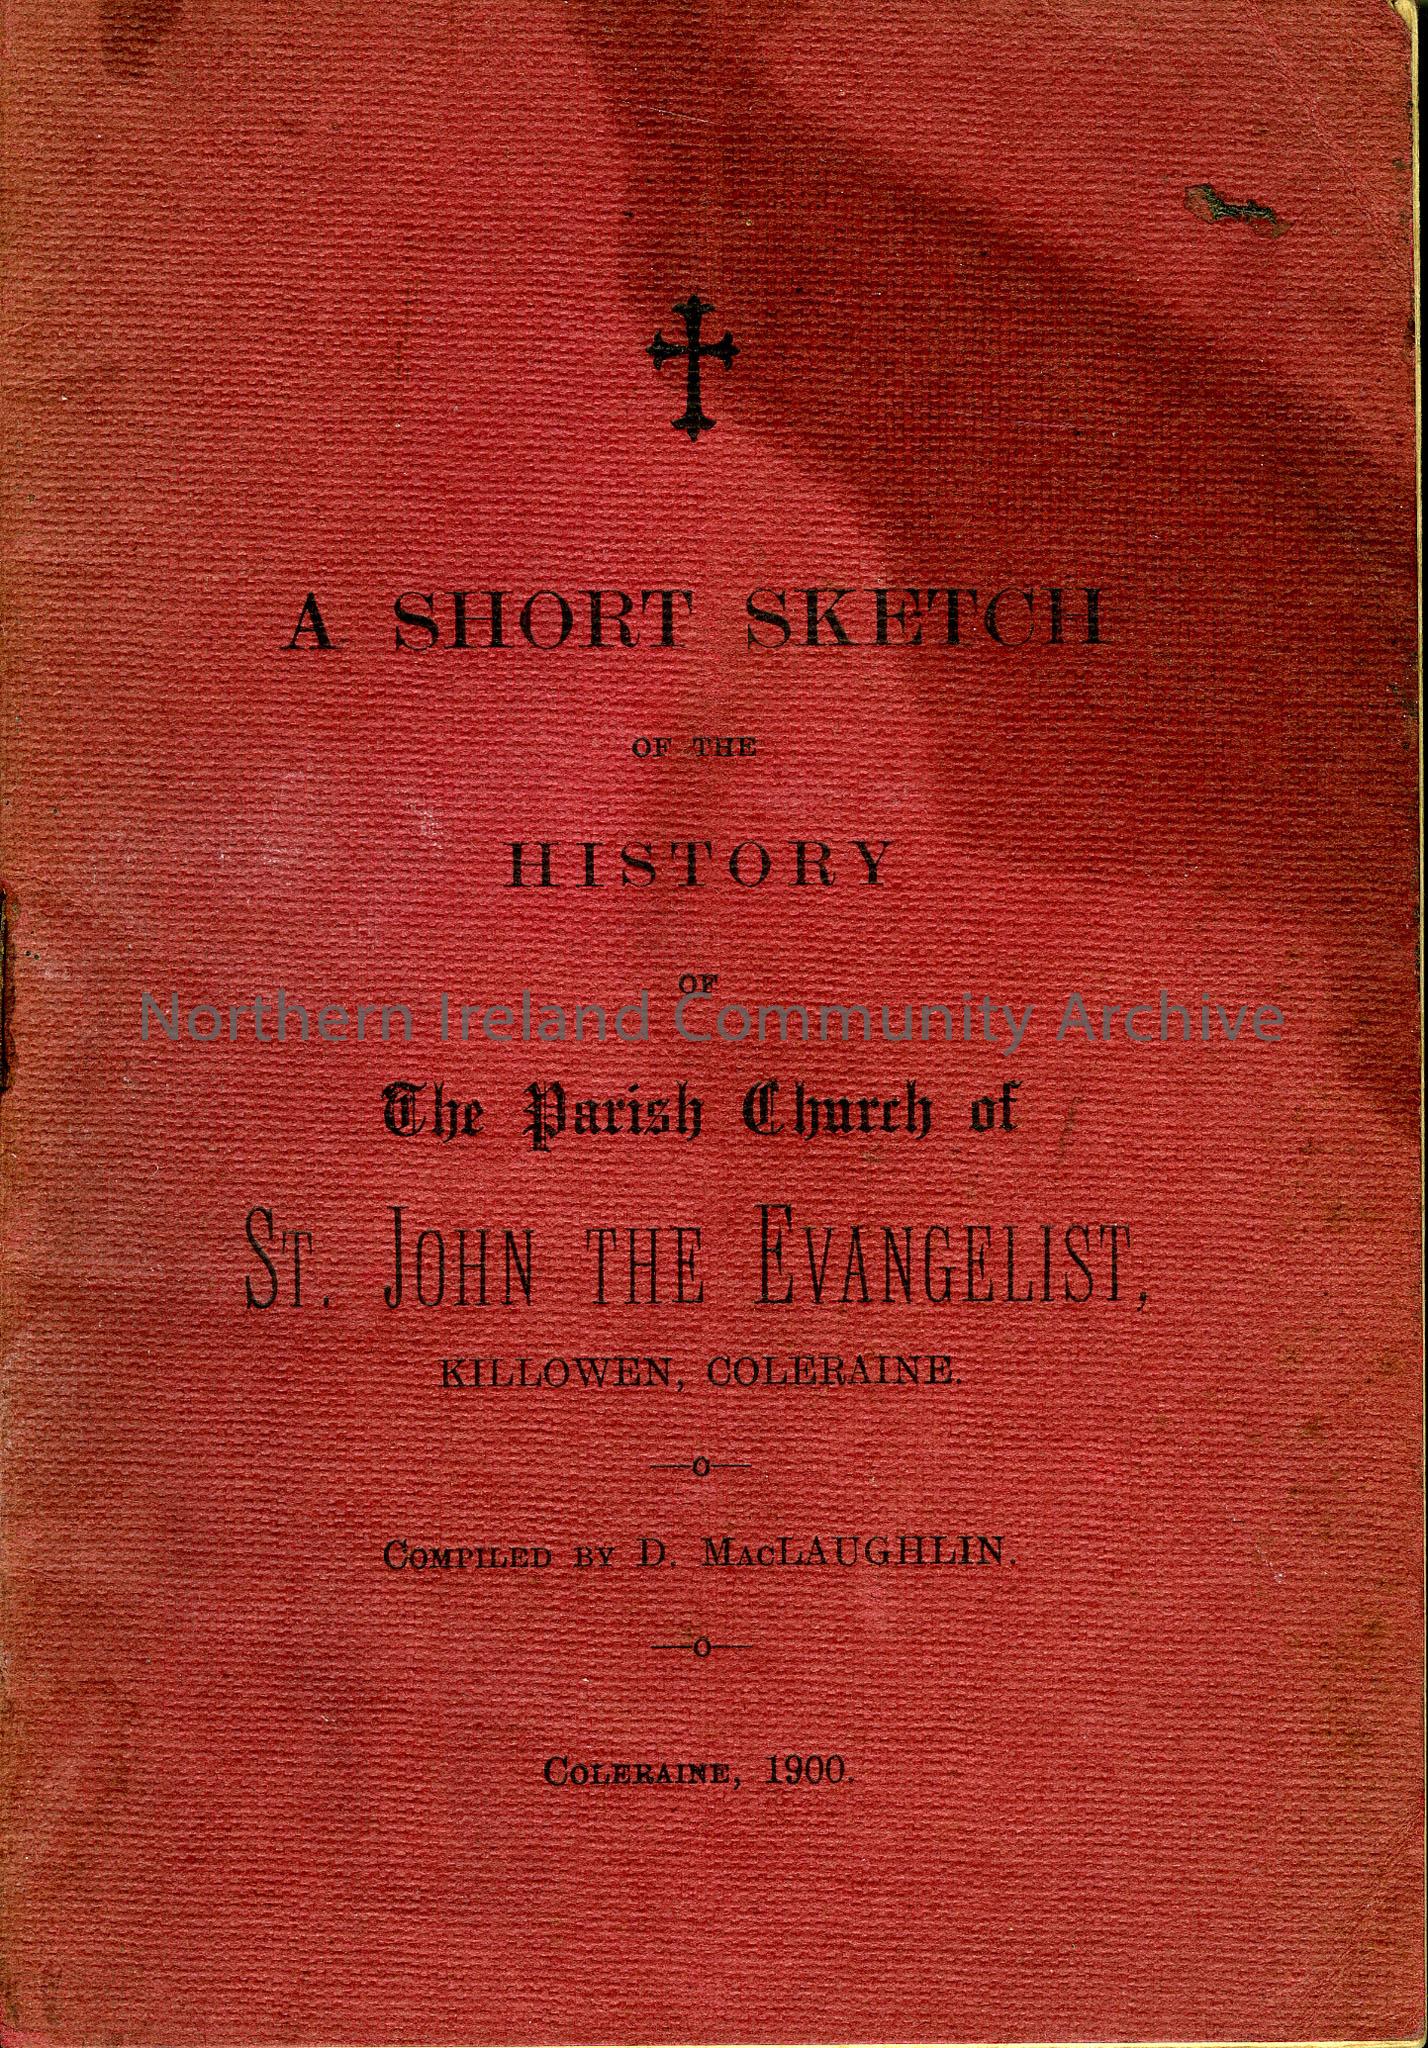 A Short Sketch of the History of the Parish Church of St.John the Evangelist.